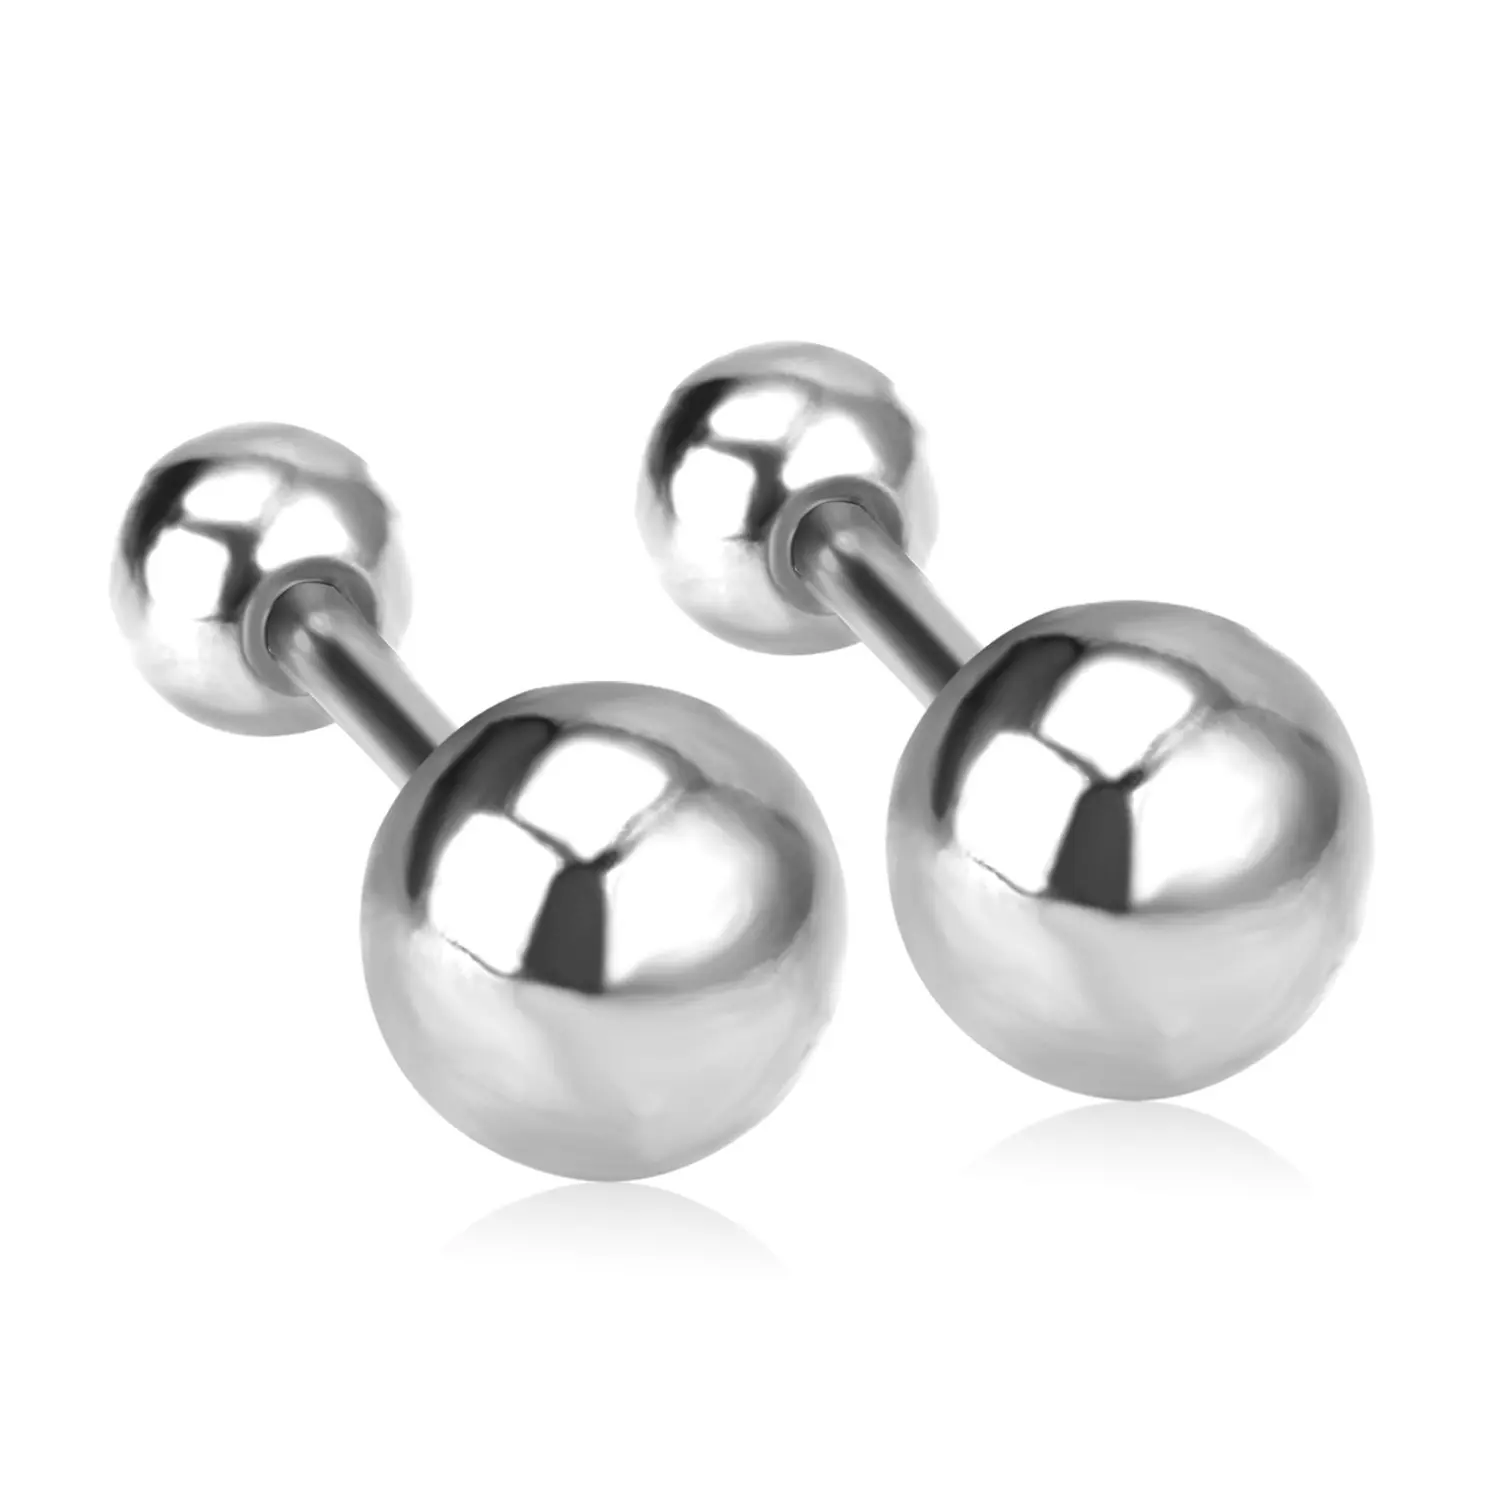 style simple personality men's and women's different sizes silver steel ball plug stud special-interest earrings wholesale sales